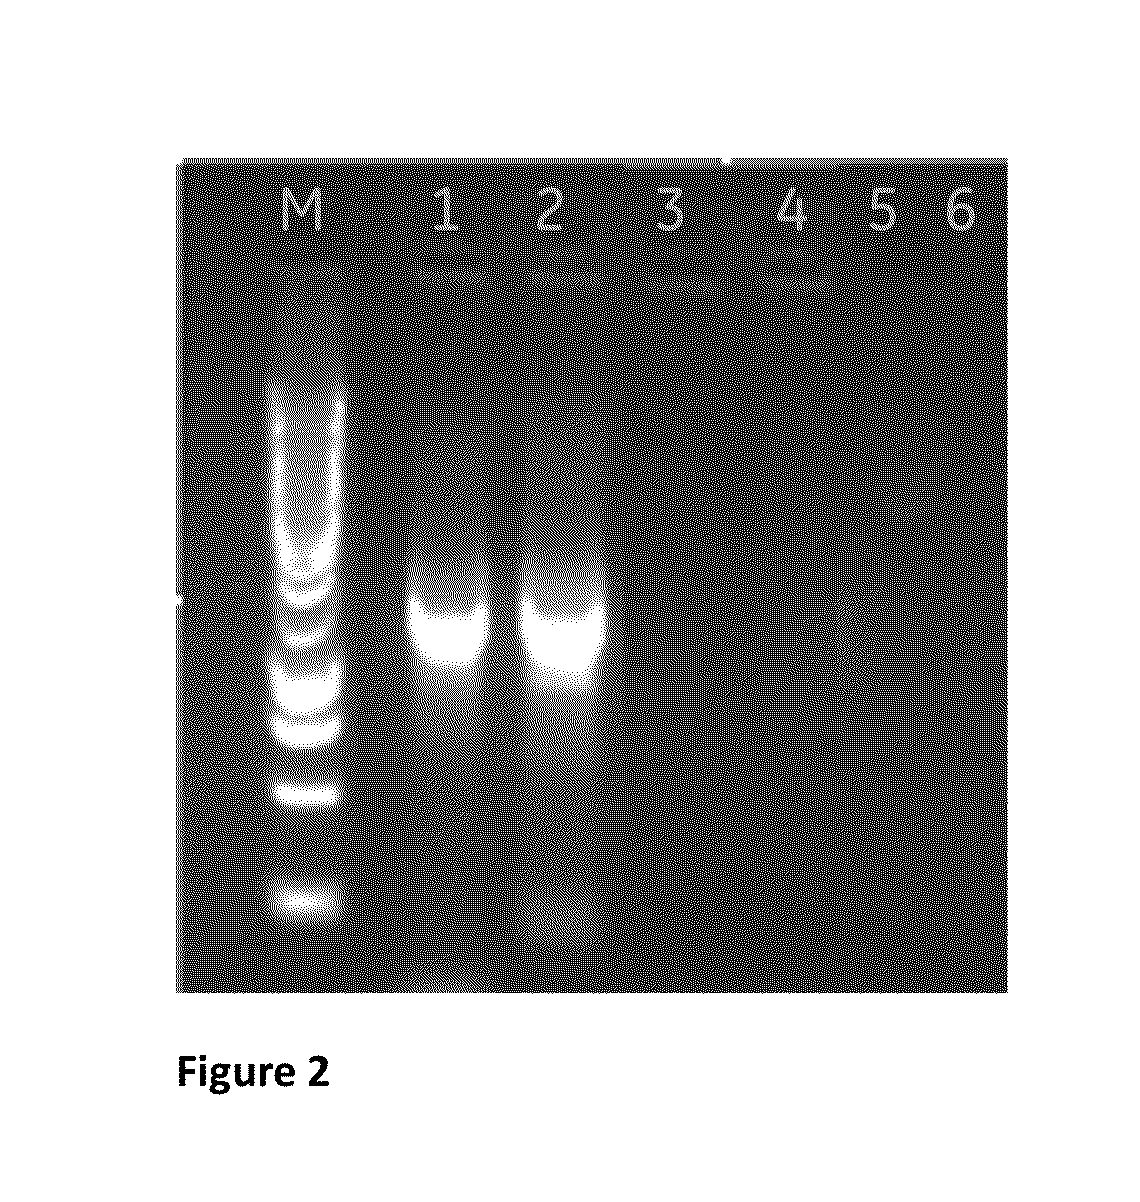 Direct nucleic acid amplification kit, reagent and method